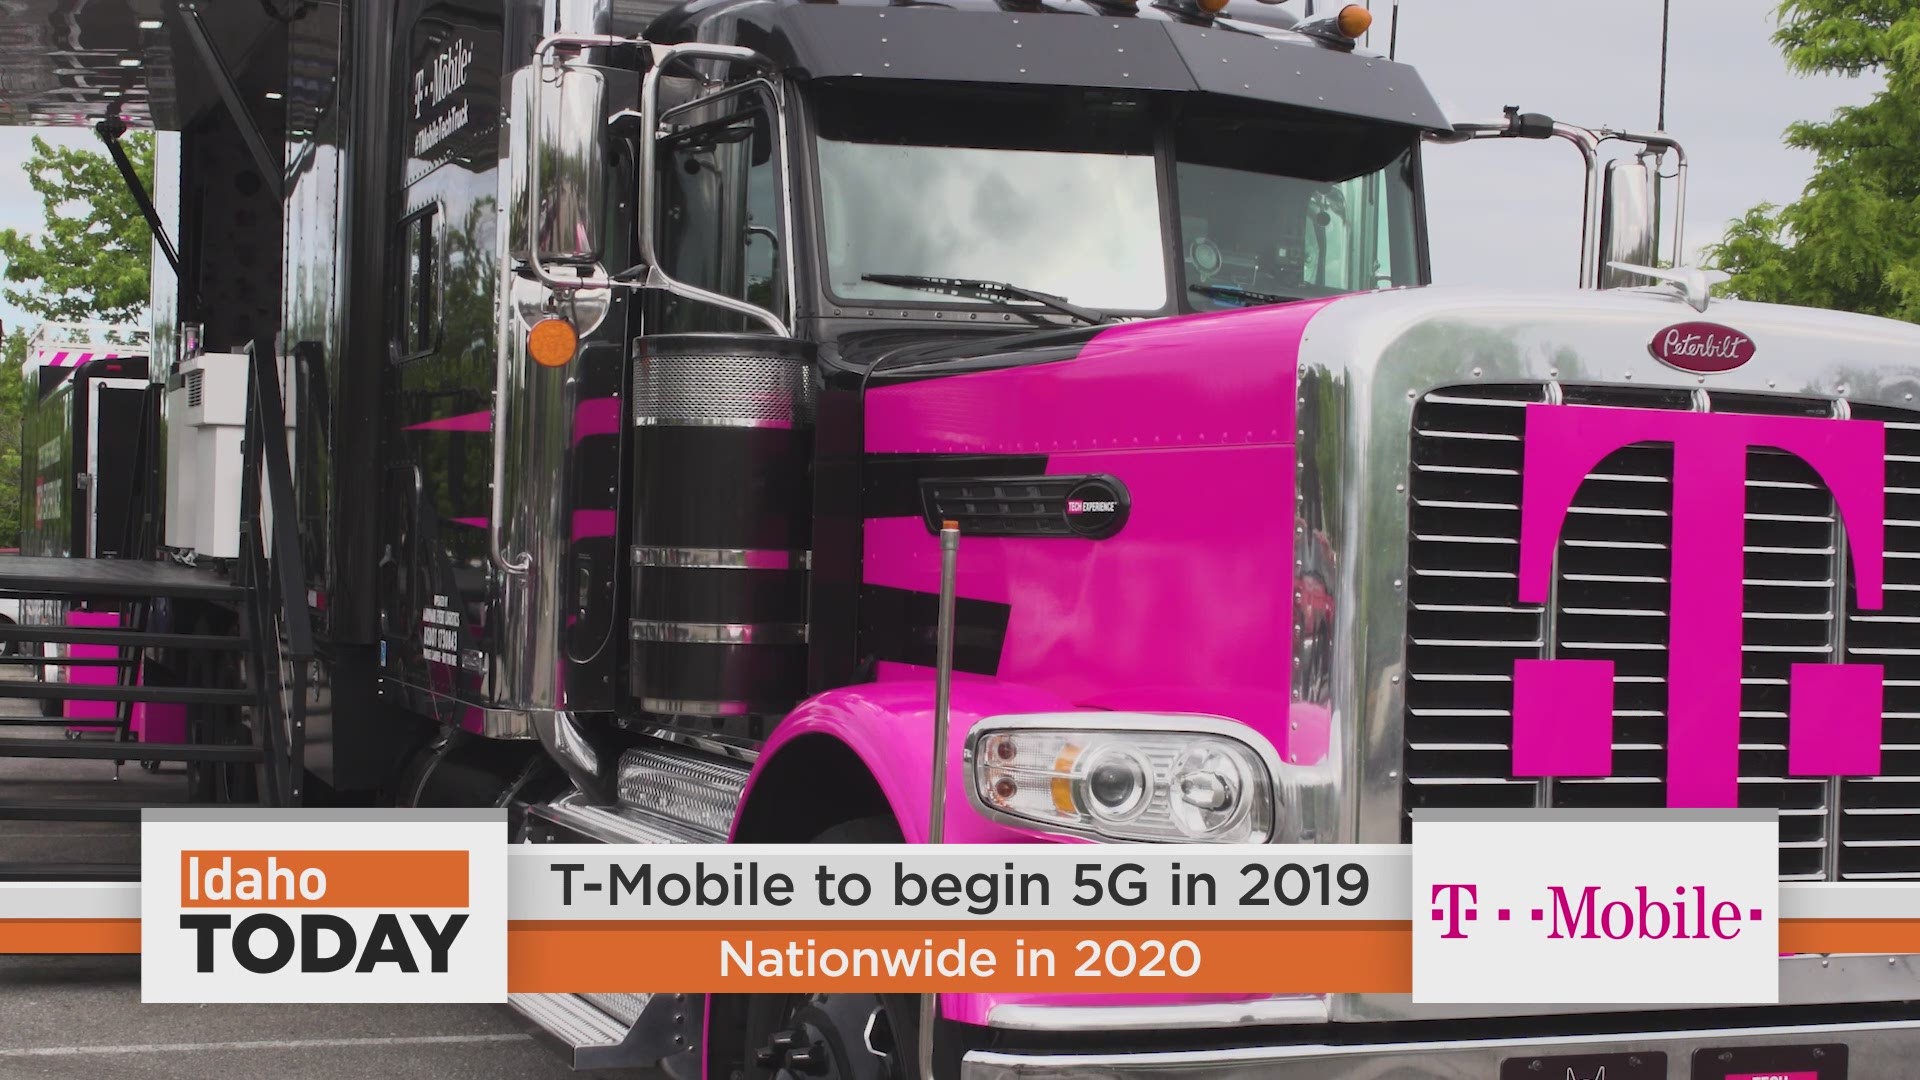 The T-Mobile Future of Wireless Truck is a state-of-the-art showroom on wheels, packed with demonstrations that show why wireless technology, like 5G, is going to be so revolutionary. T-Mobile is bringing 5G to customers starting this year as soon as smartphones are available, and nationwide in 2020. 

If you’re interested in learning more about T-Mobile and 5G technology, visit t-mobile.com and, keep an eye on “The Future of Wireless Truck” on social media at #T-MobileTechTruck – you never know when they might be at an event near you!